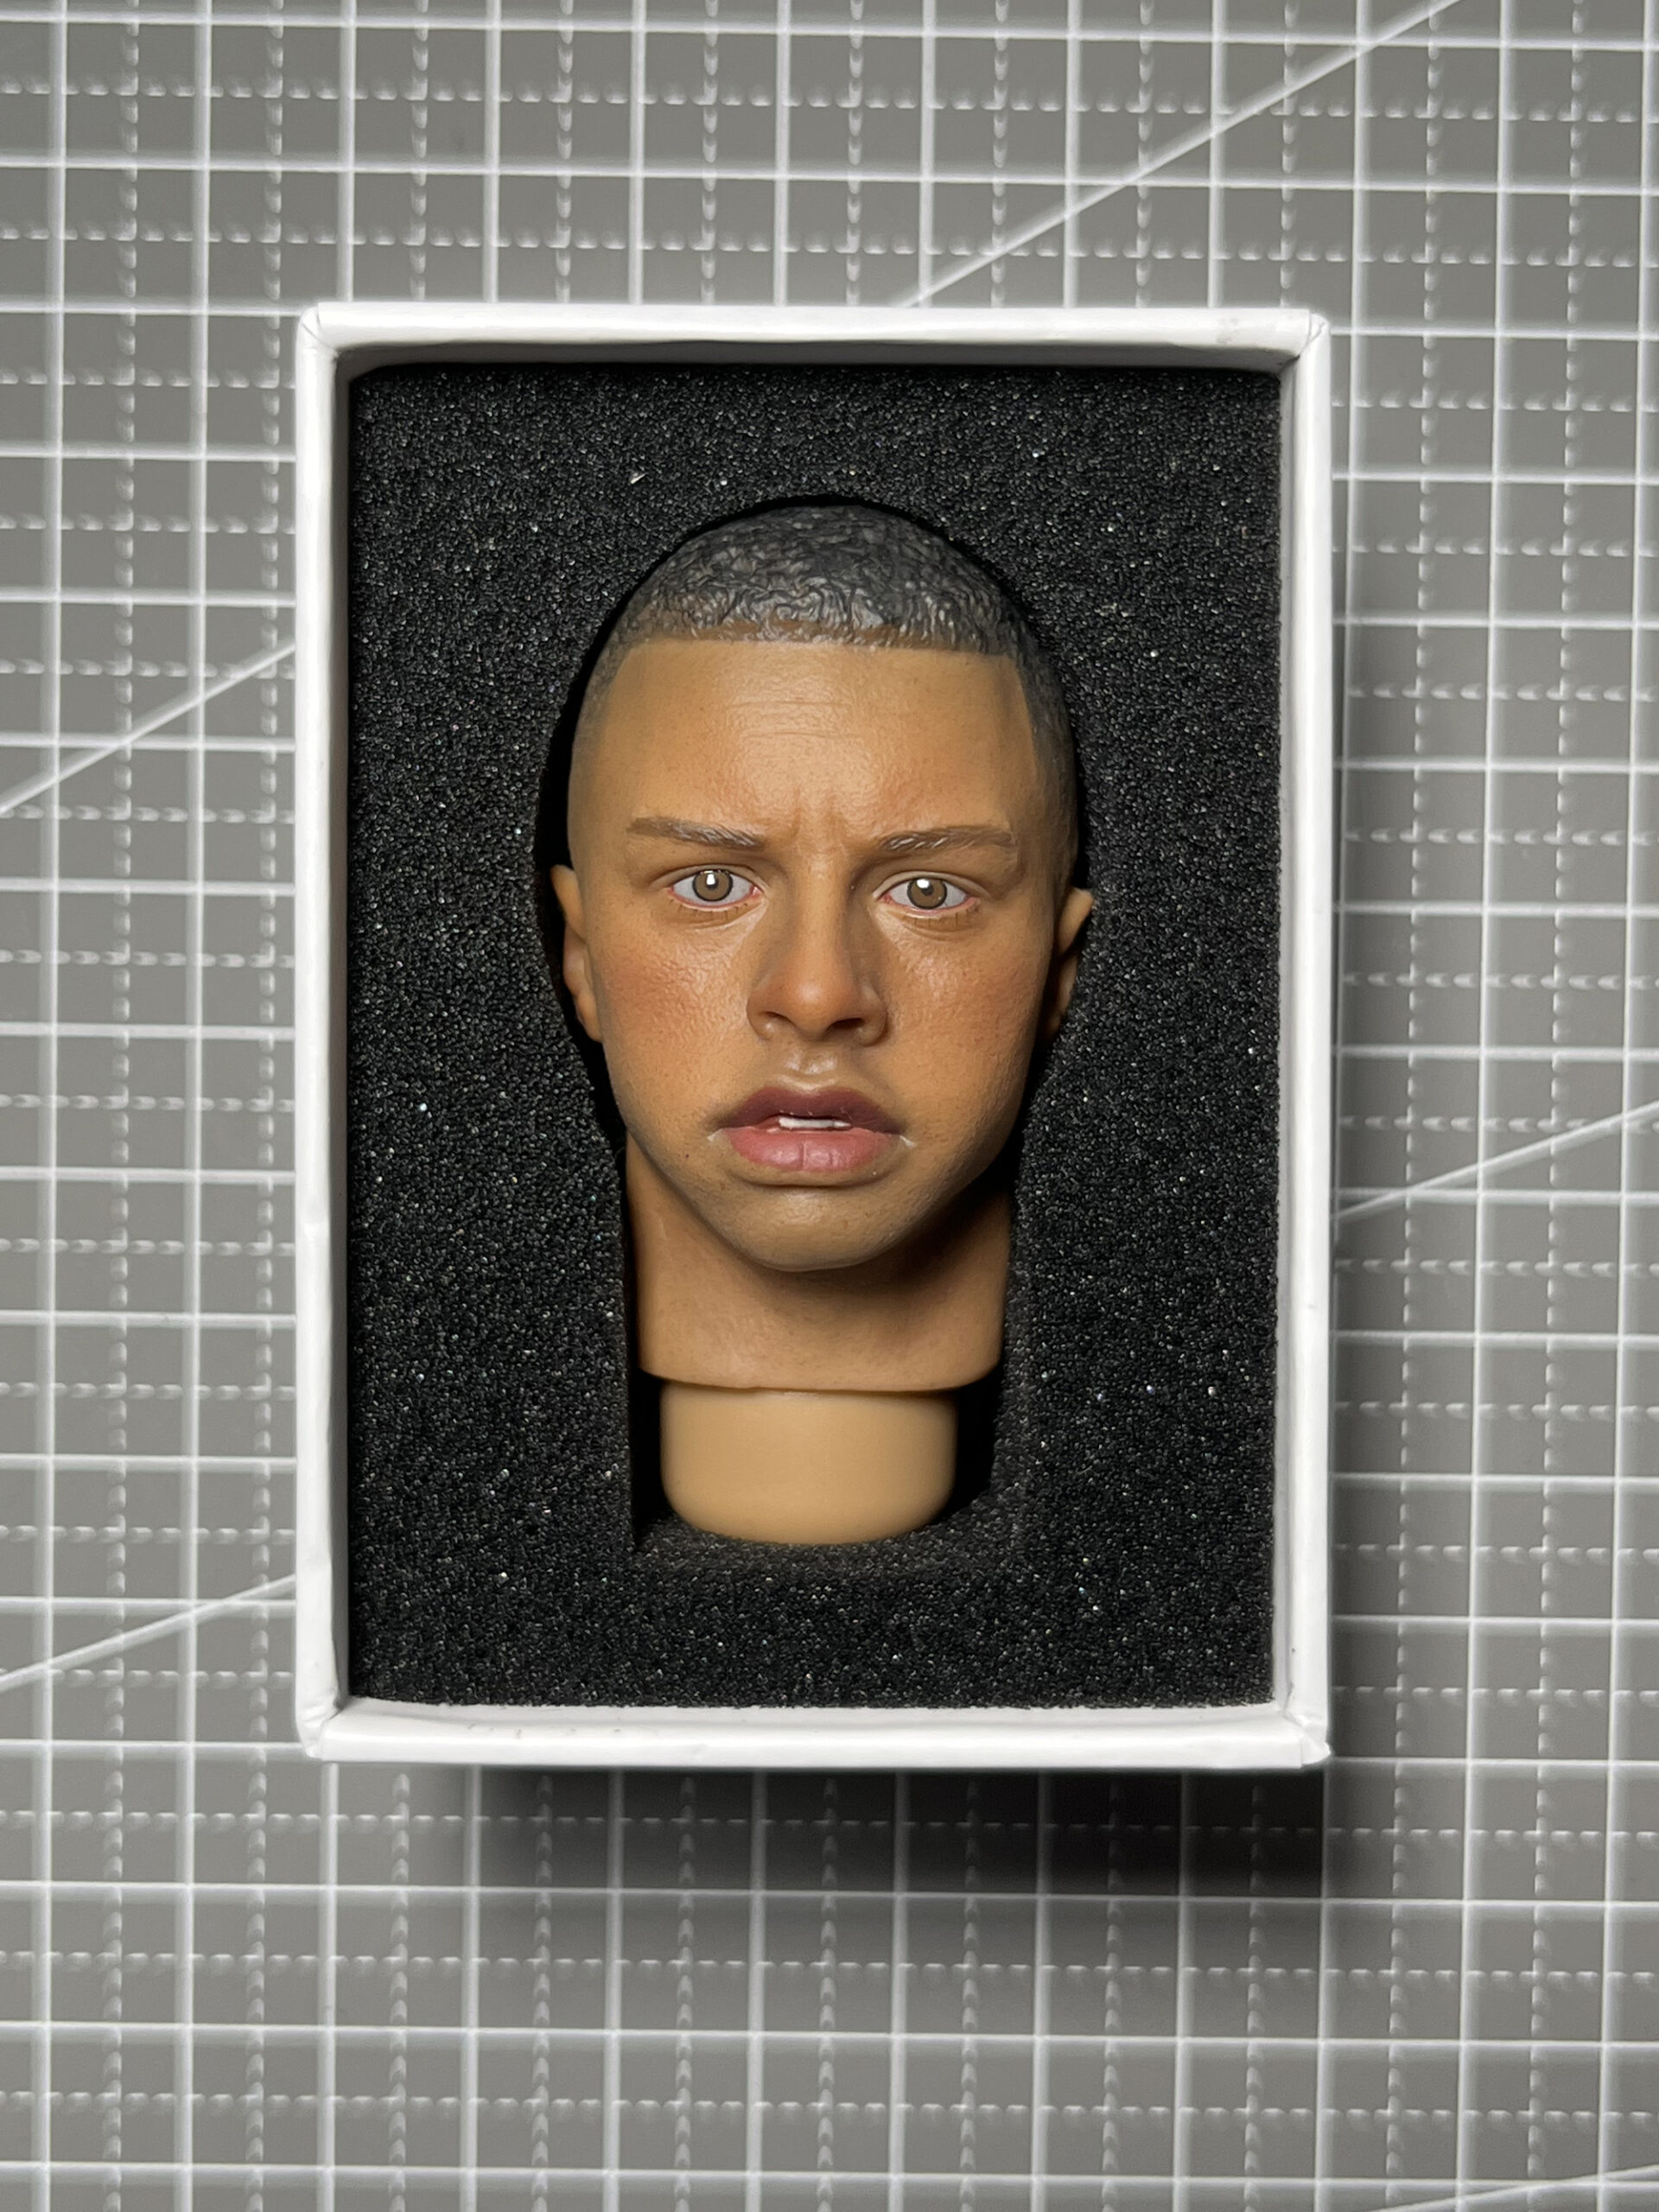 FacepoolFigure 1/6 Black Facepoolfigure Male – with FP-S-002 Sculpt Store Head Online Expression